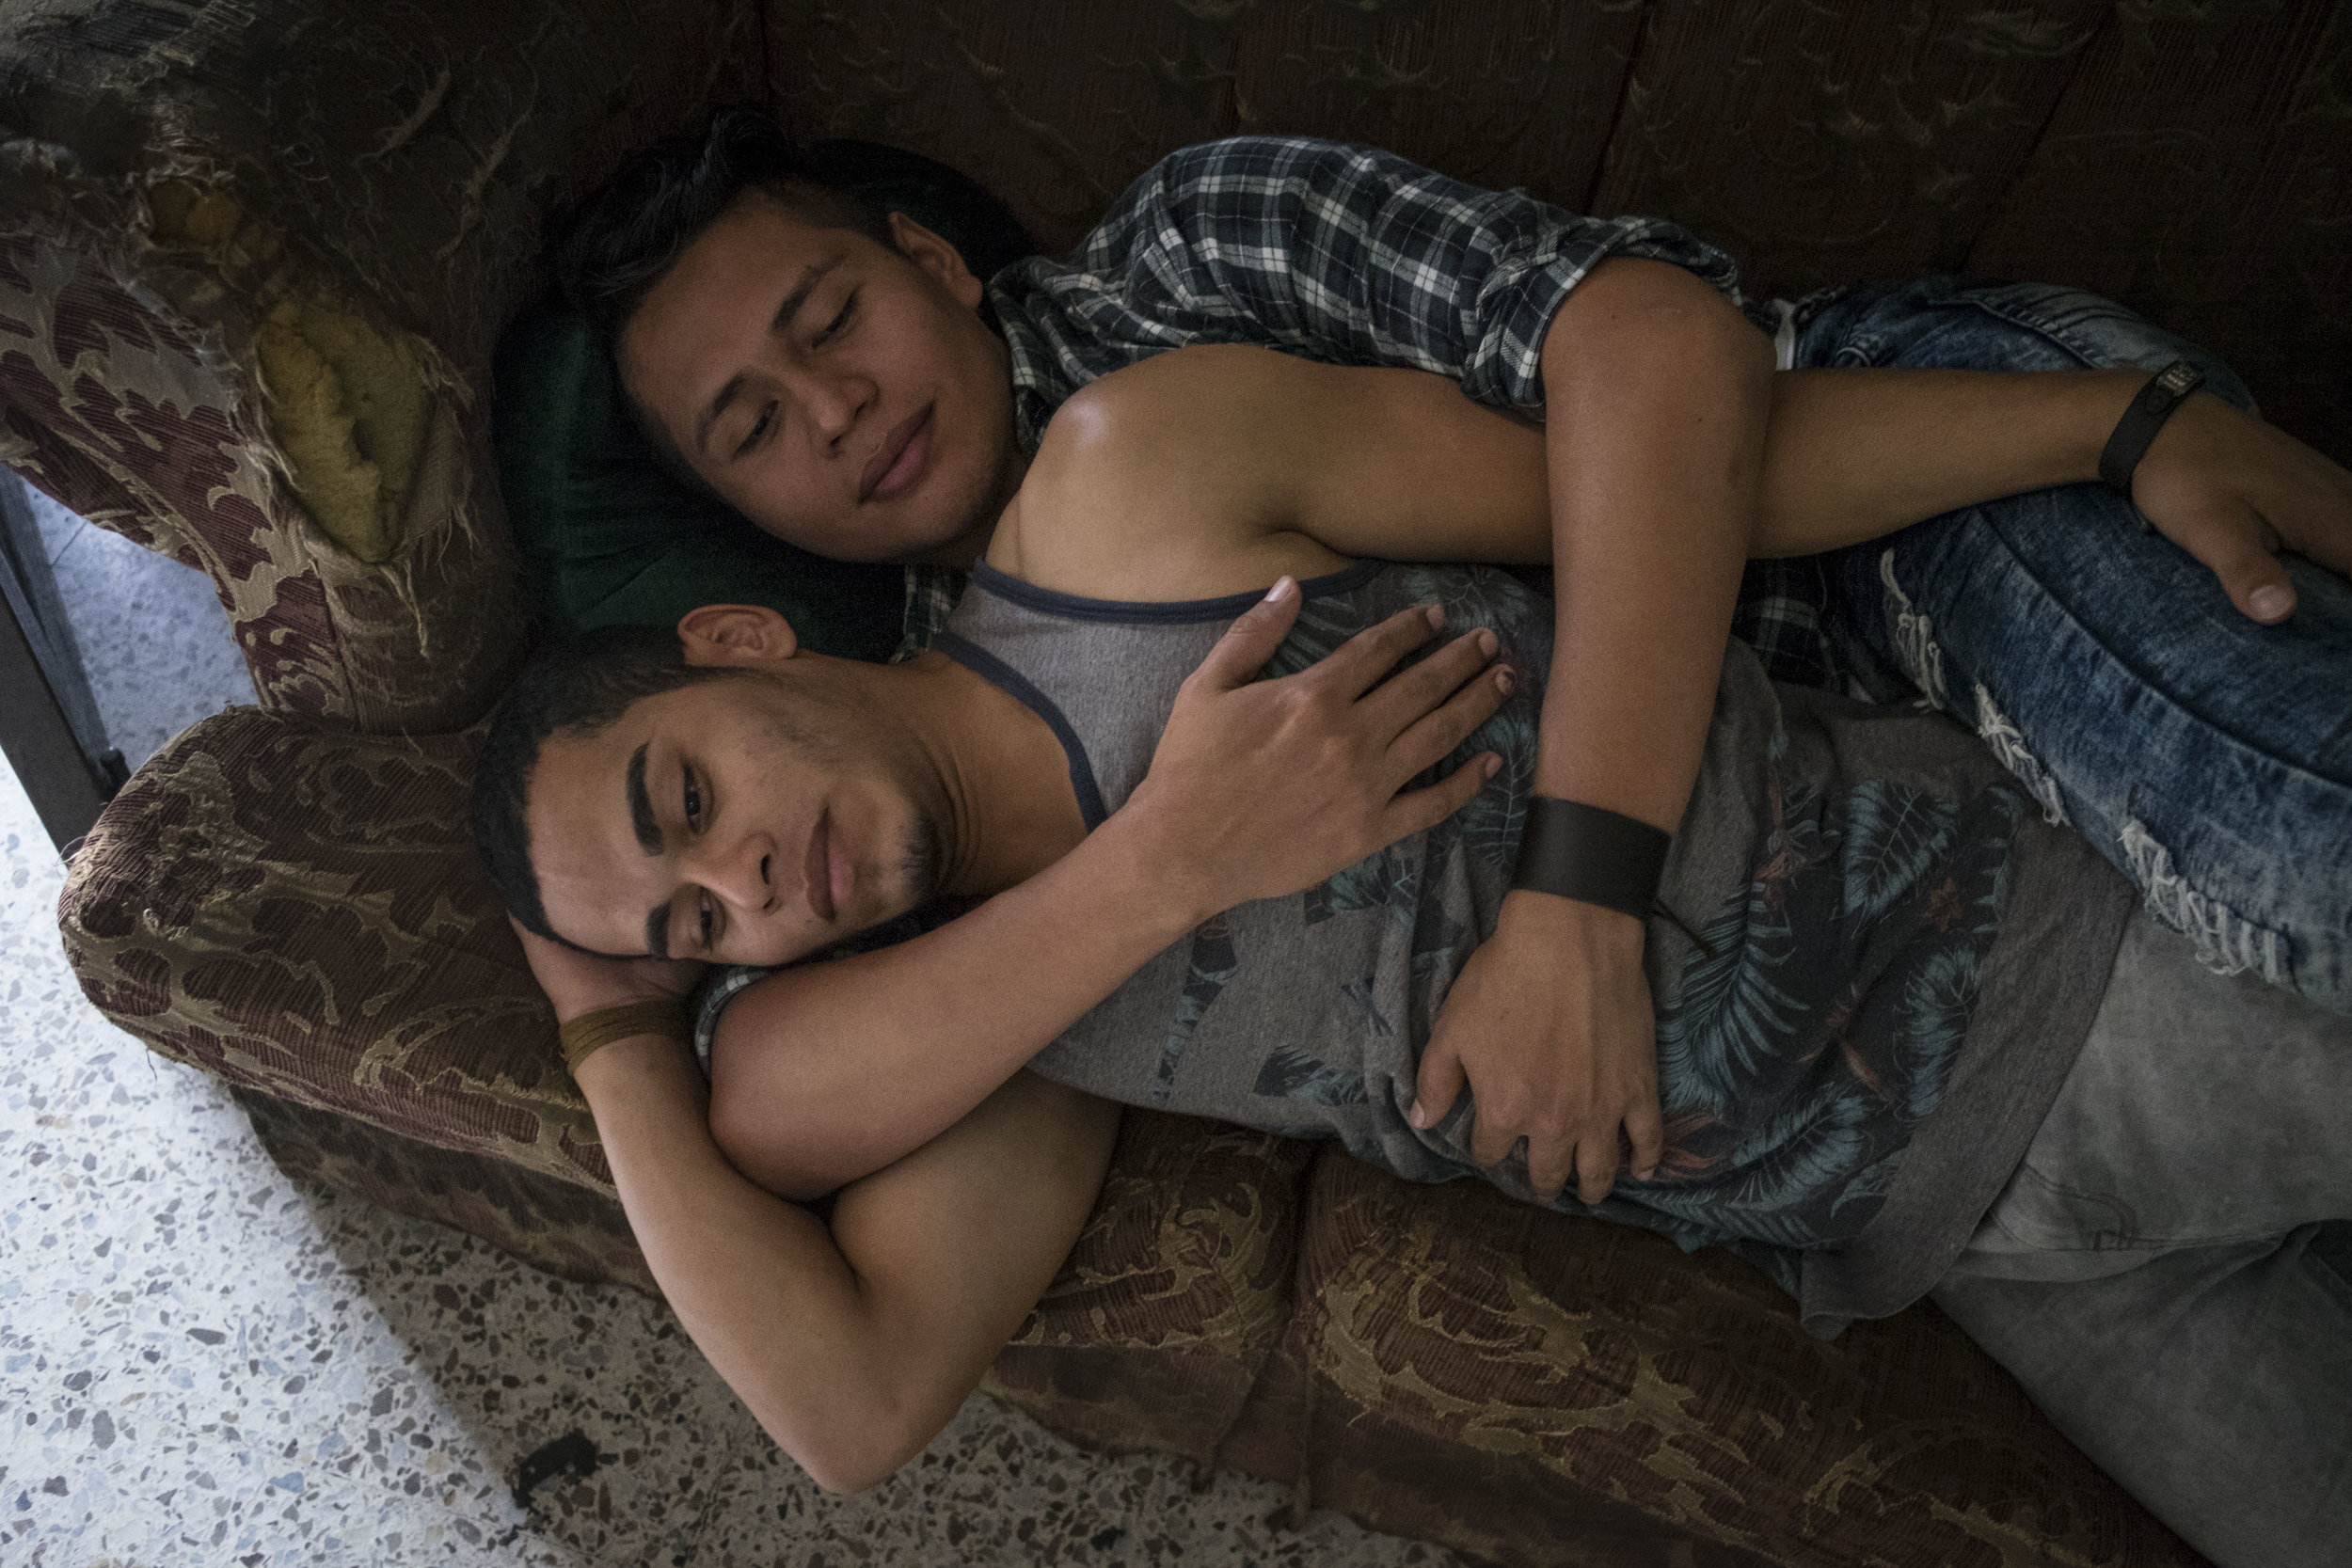  A couple embracing on the sofa in the premises of the LGBT organization Arcoiris, that is a space that aims to reunite homosexuals and transgenders in Tegucigalpa in a place where they can spend time feeling relatively safe. 